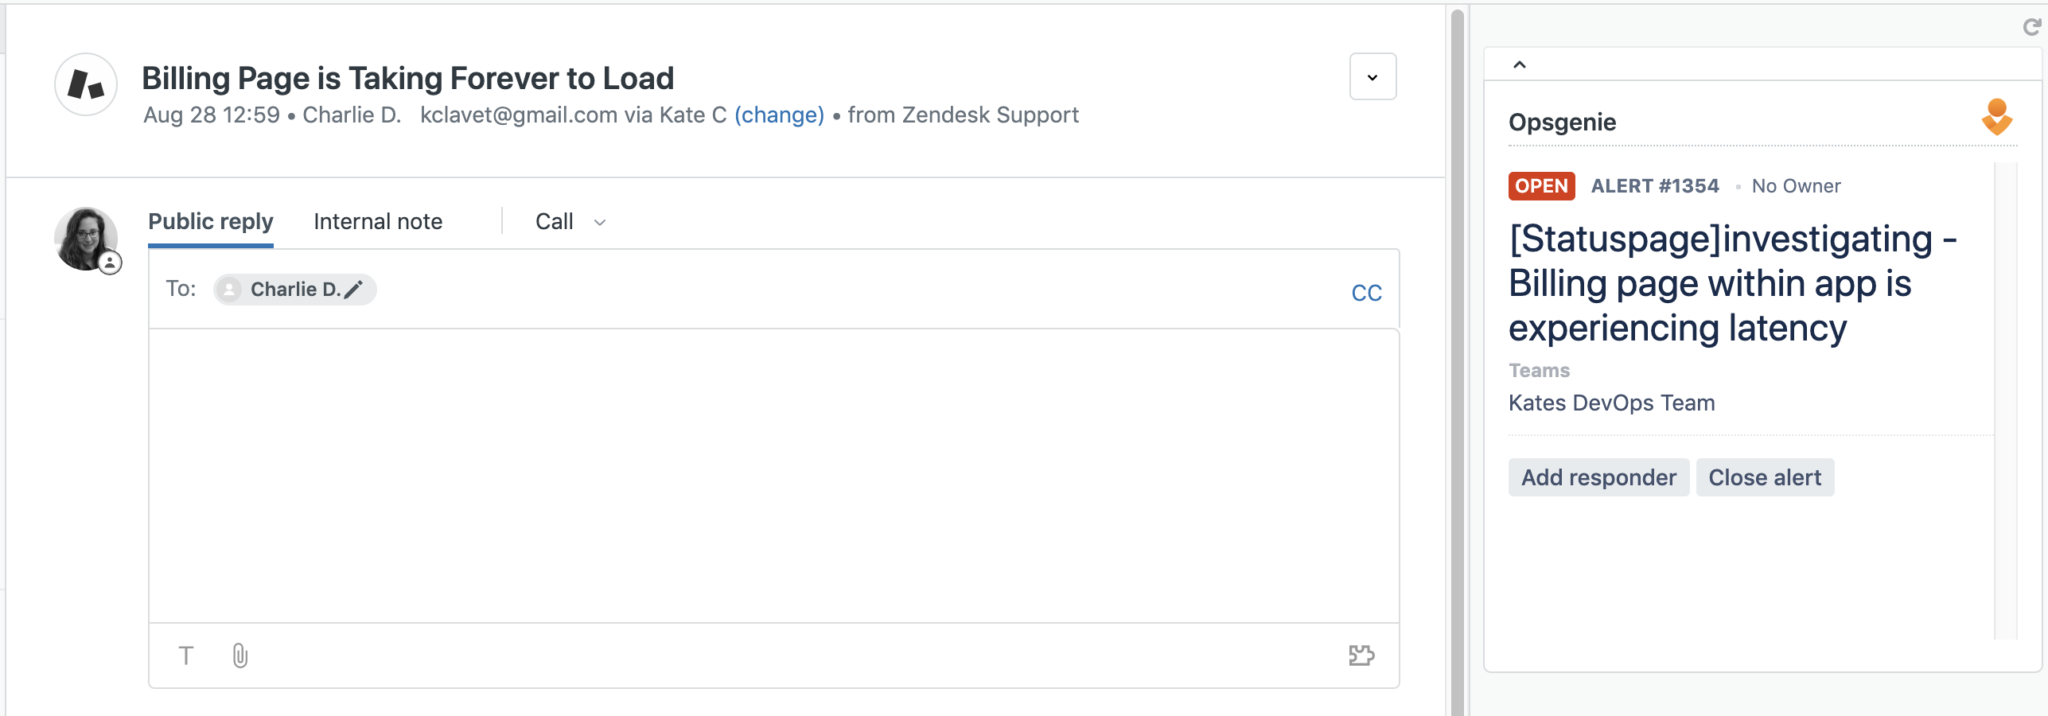 Use the Opsgenie app in Zendesk to manual create alerts directly from the Zendesk UI.